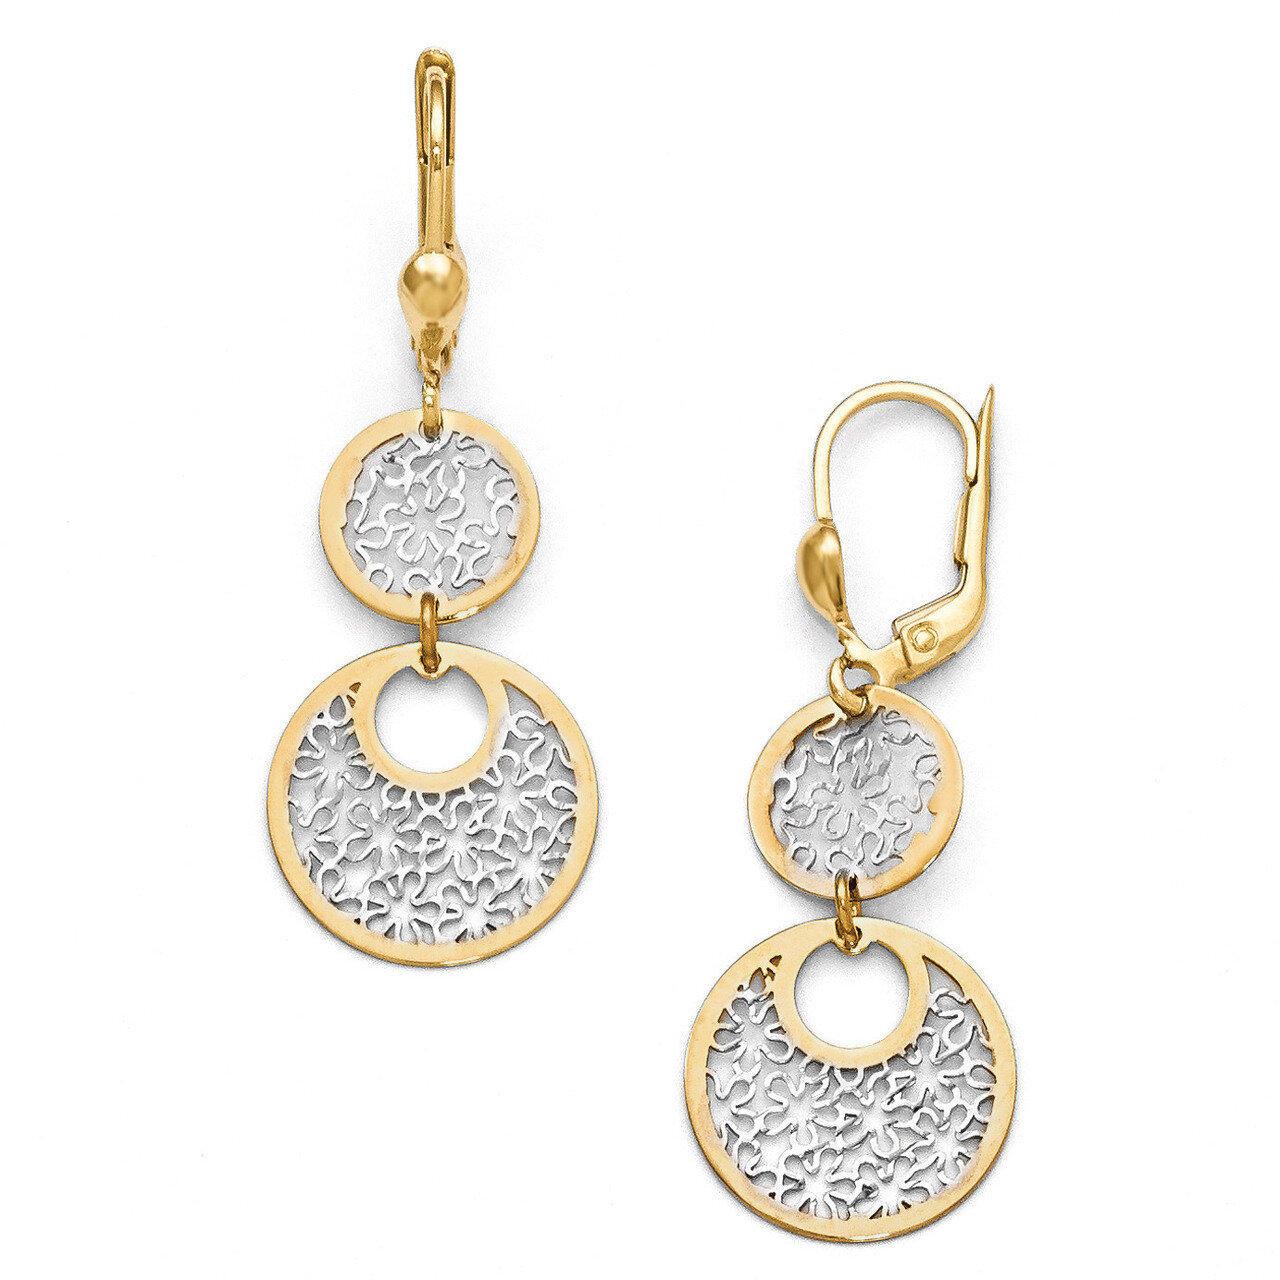 White Rhodium Polished & Textured Leverback Earrings - 14k Gold HB-LE697